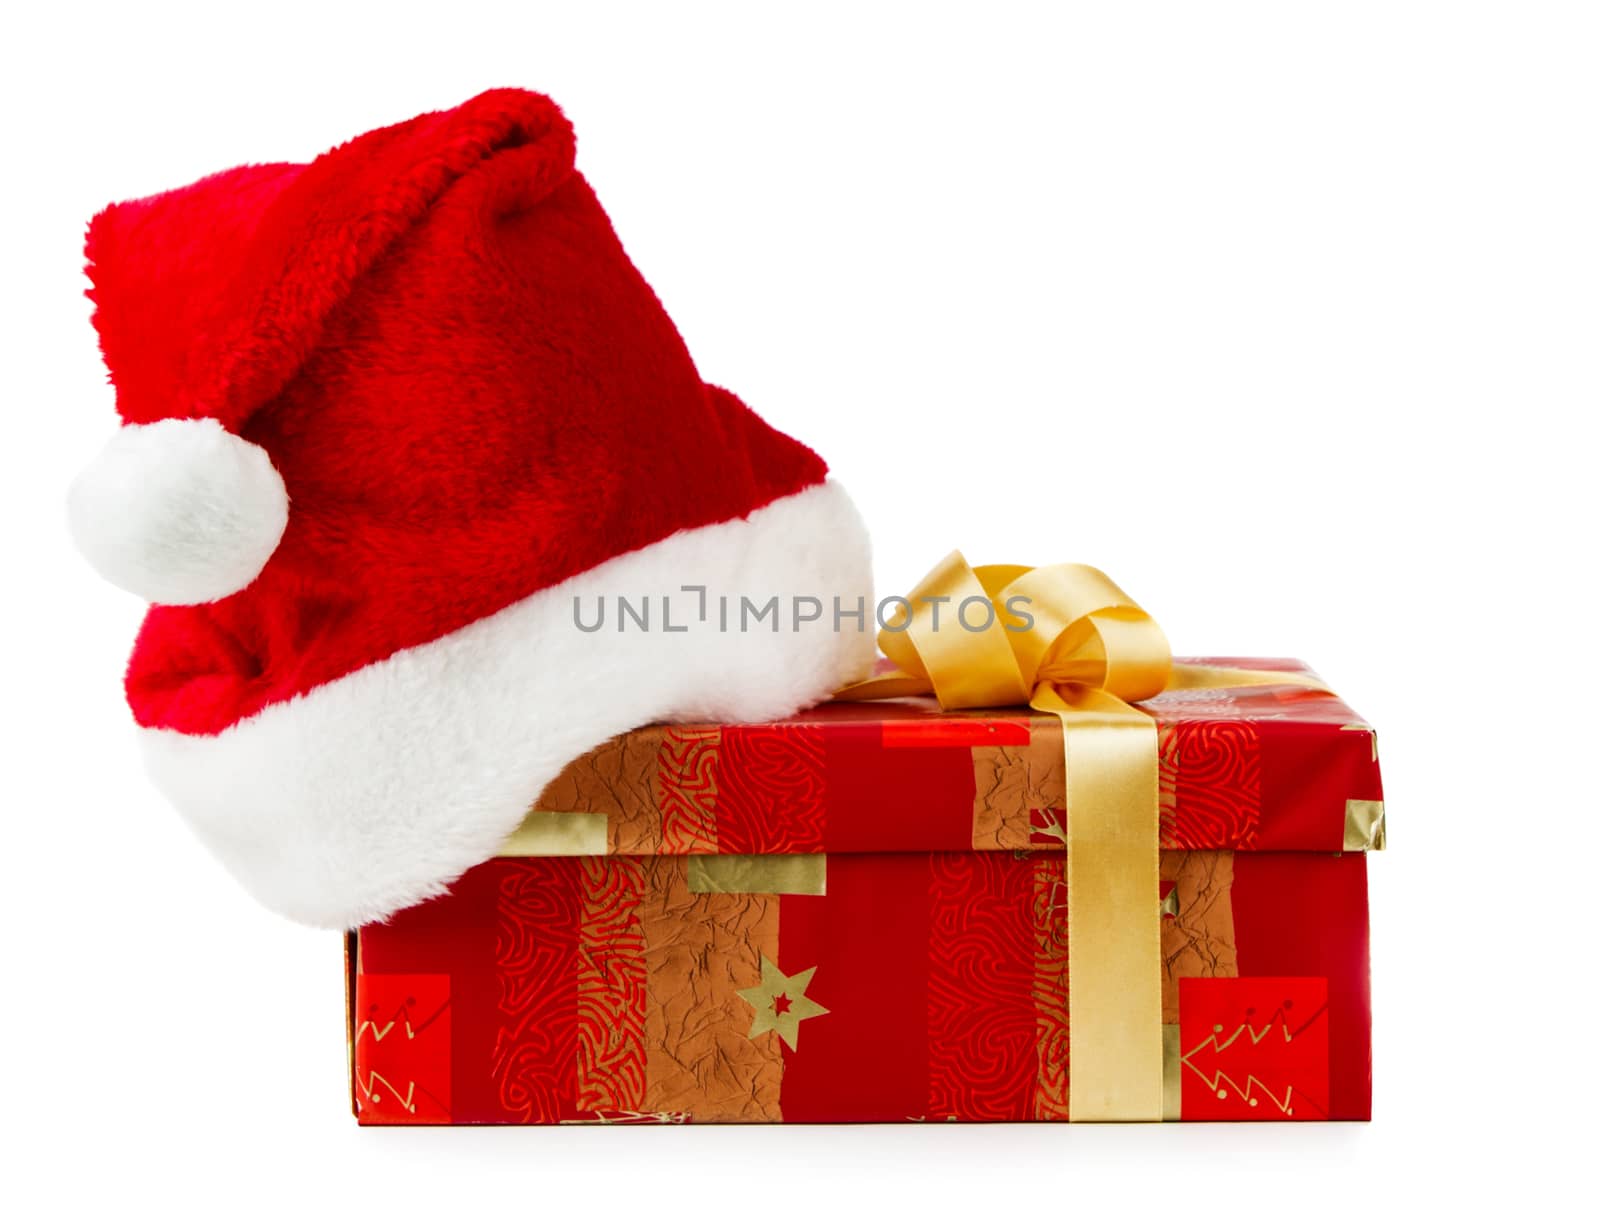 Christmas present with Santa hat isolated on white background